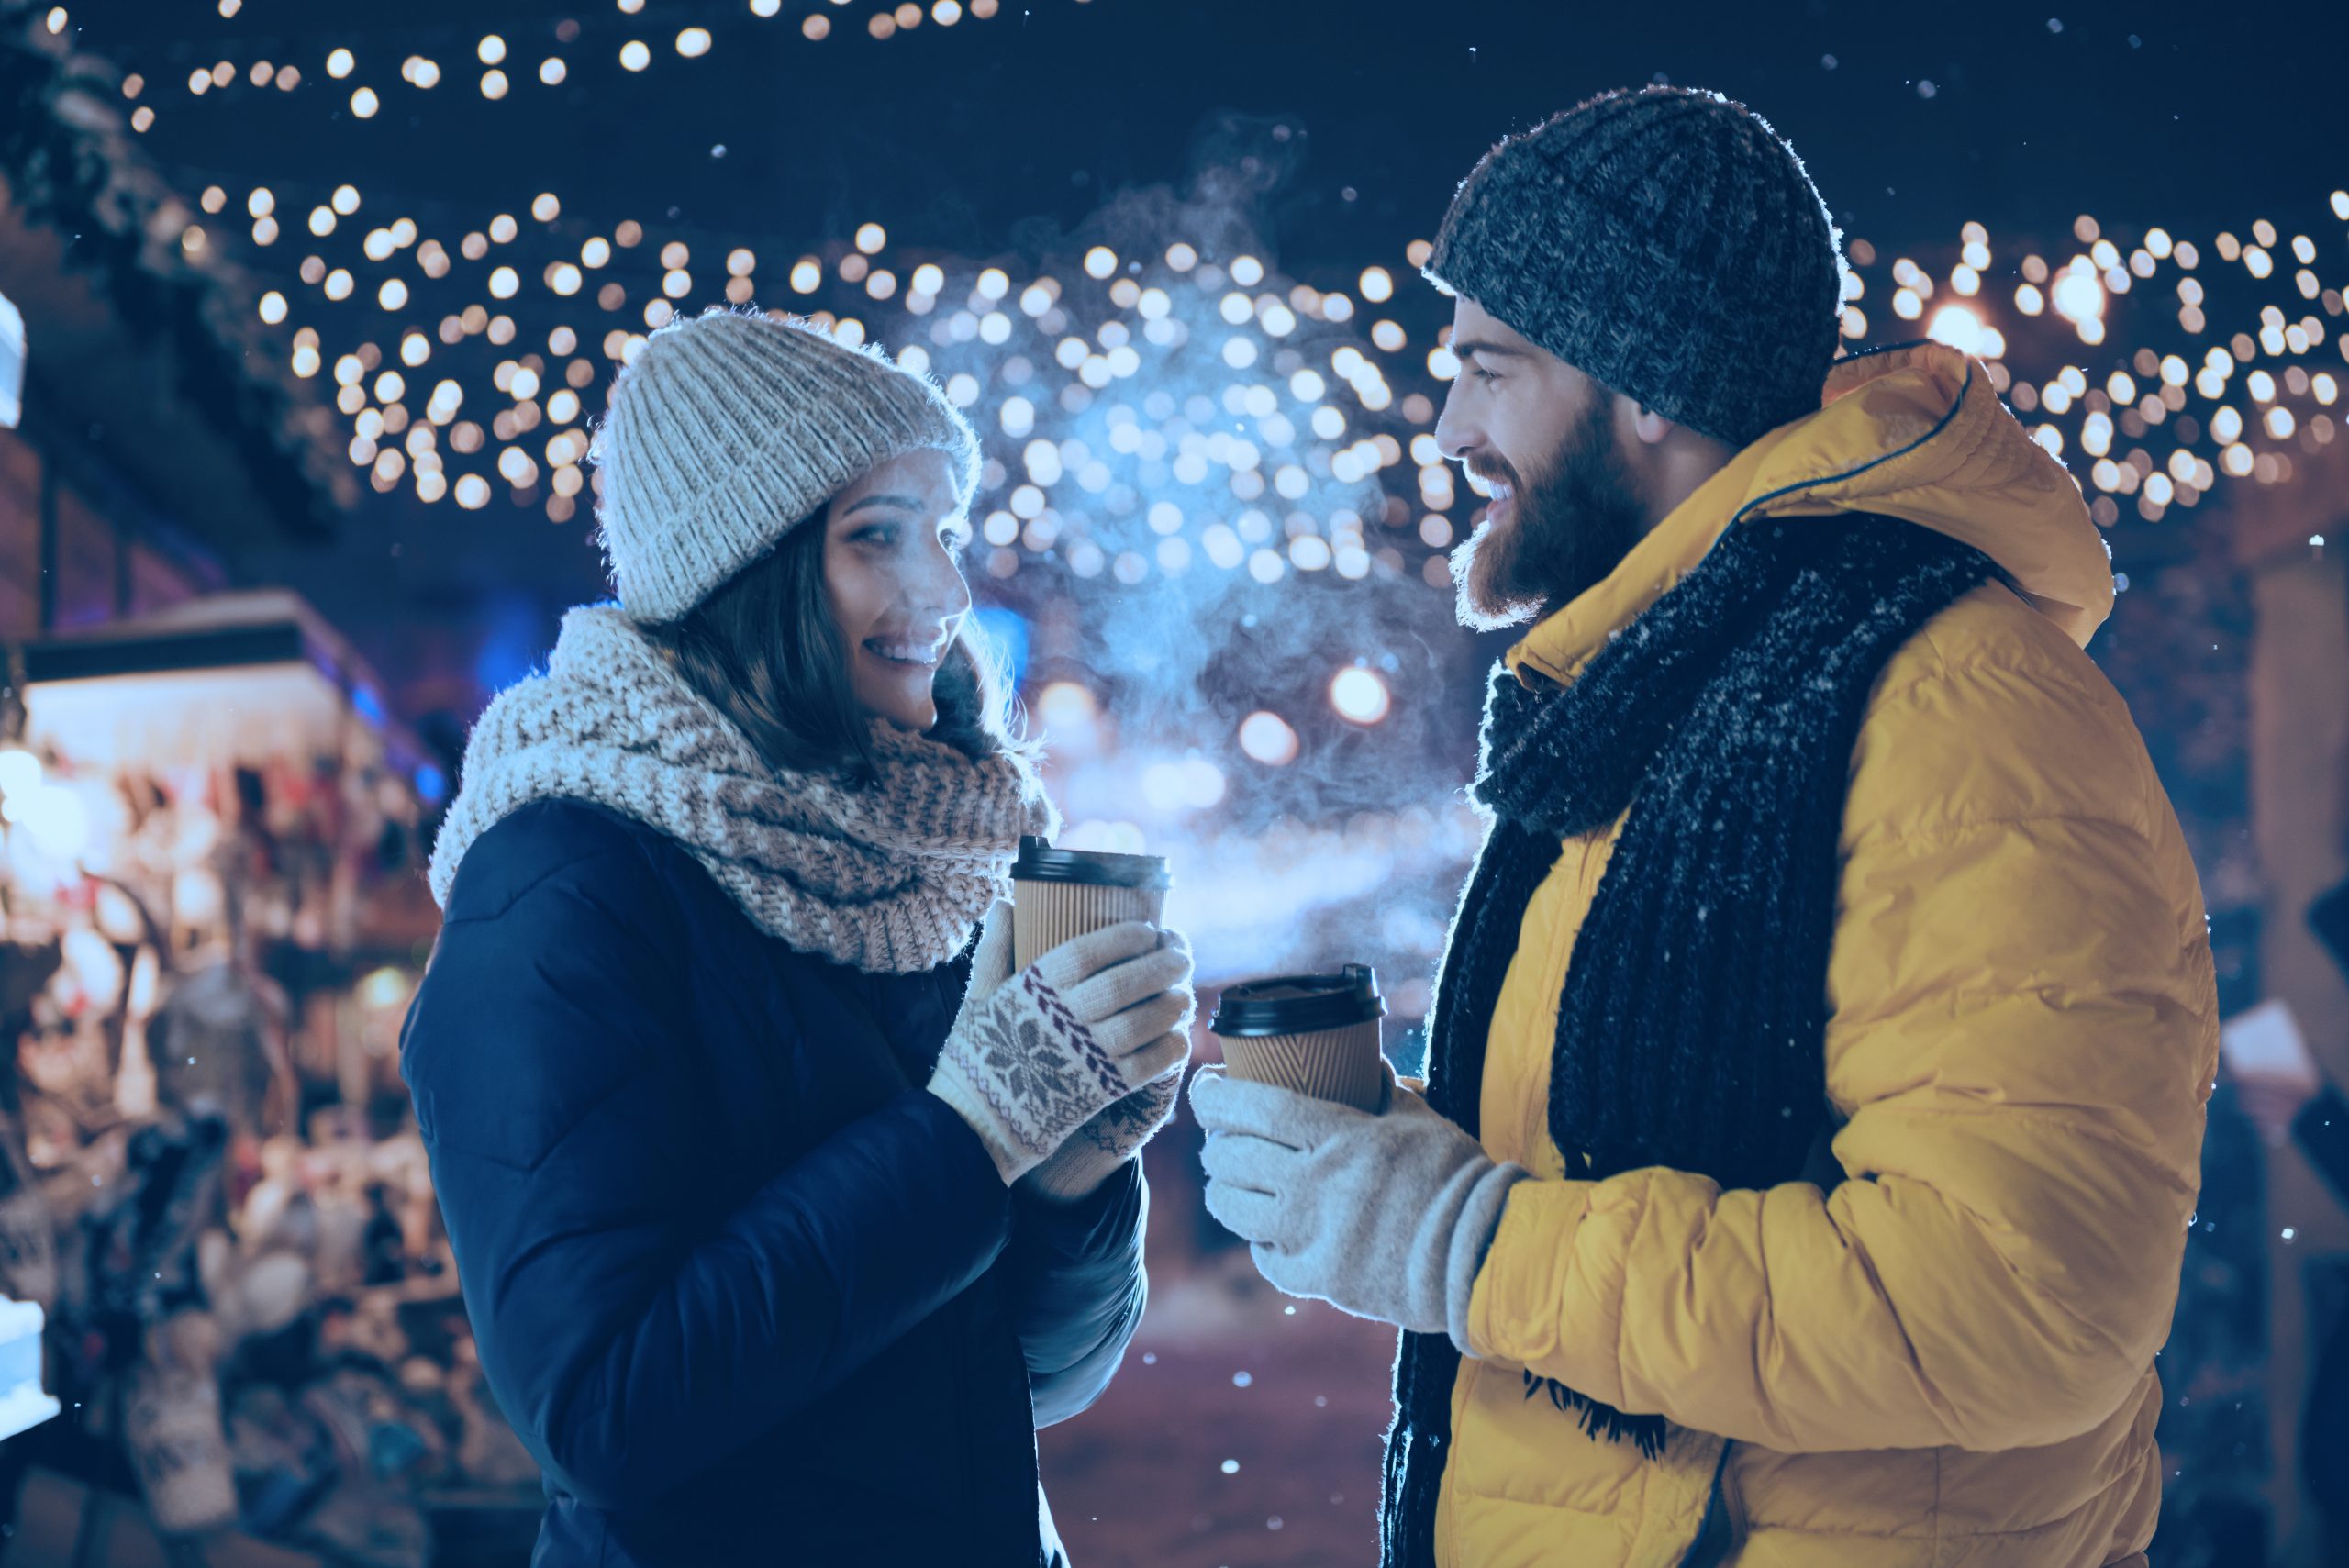 Photo of two people talking couple husband guy wife lady drink hot beverage, spend x-mas eve magic land newyear shopping market buying gifts wear jackets outside